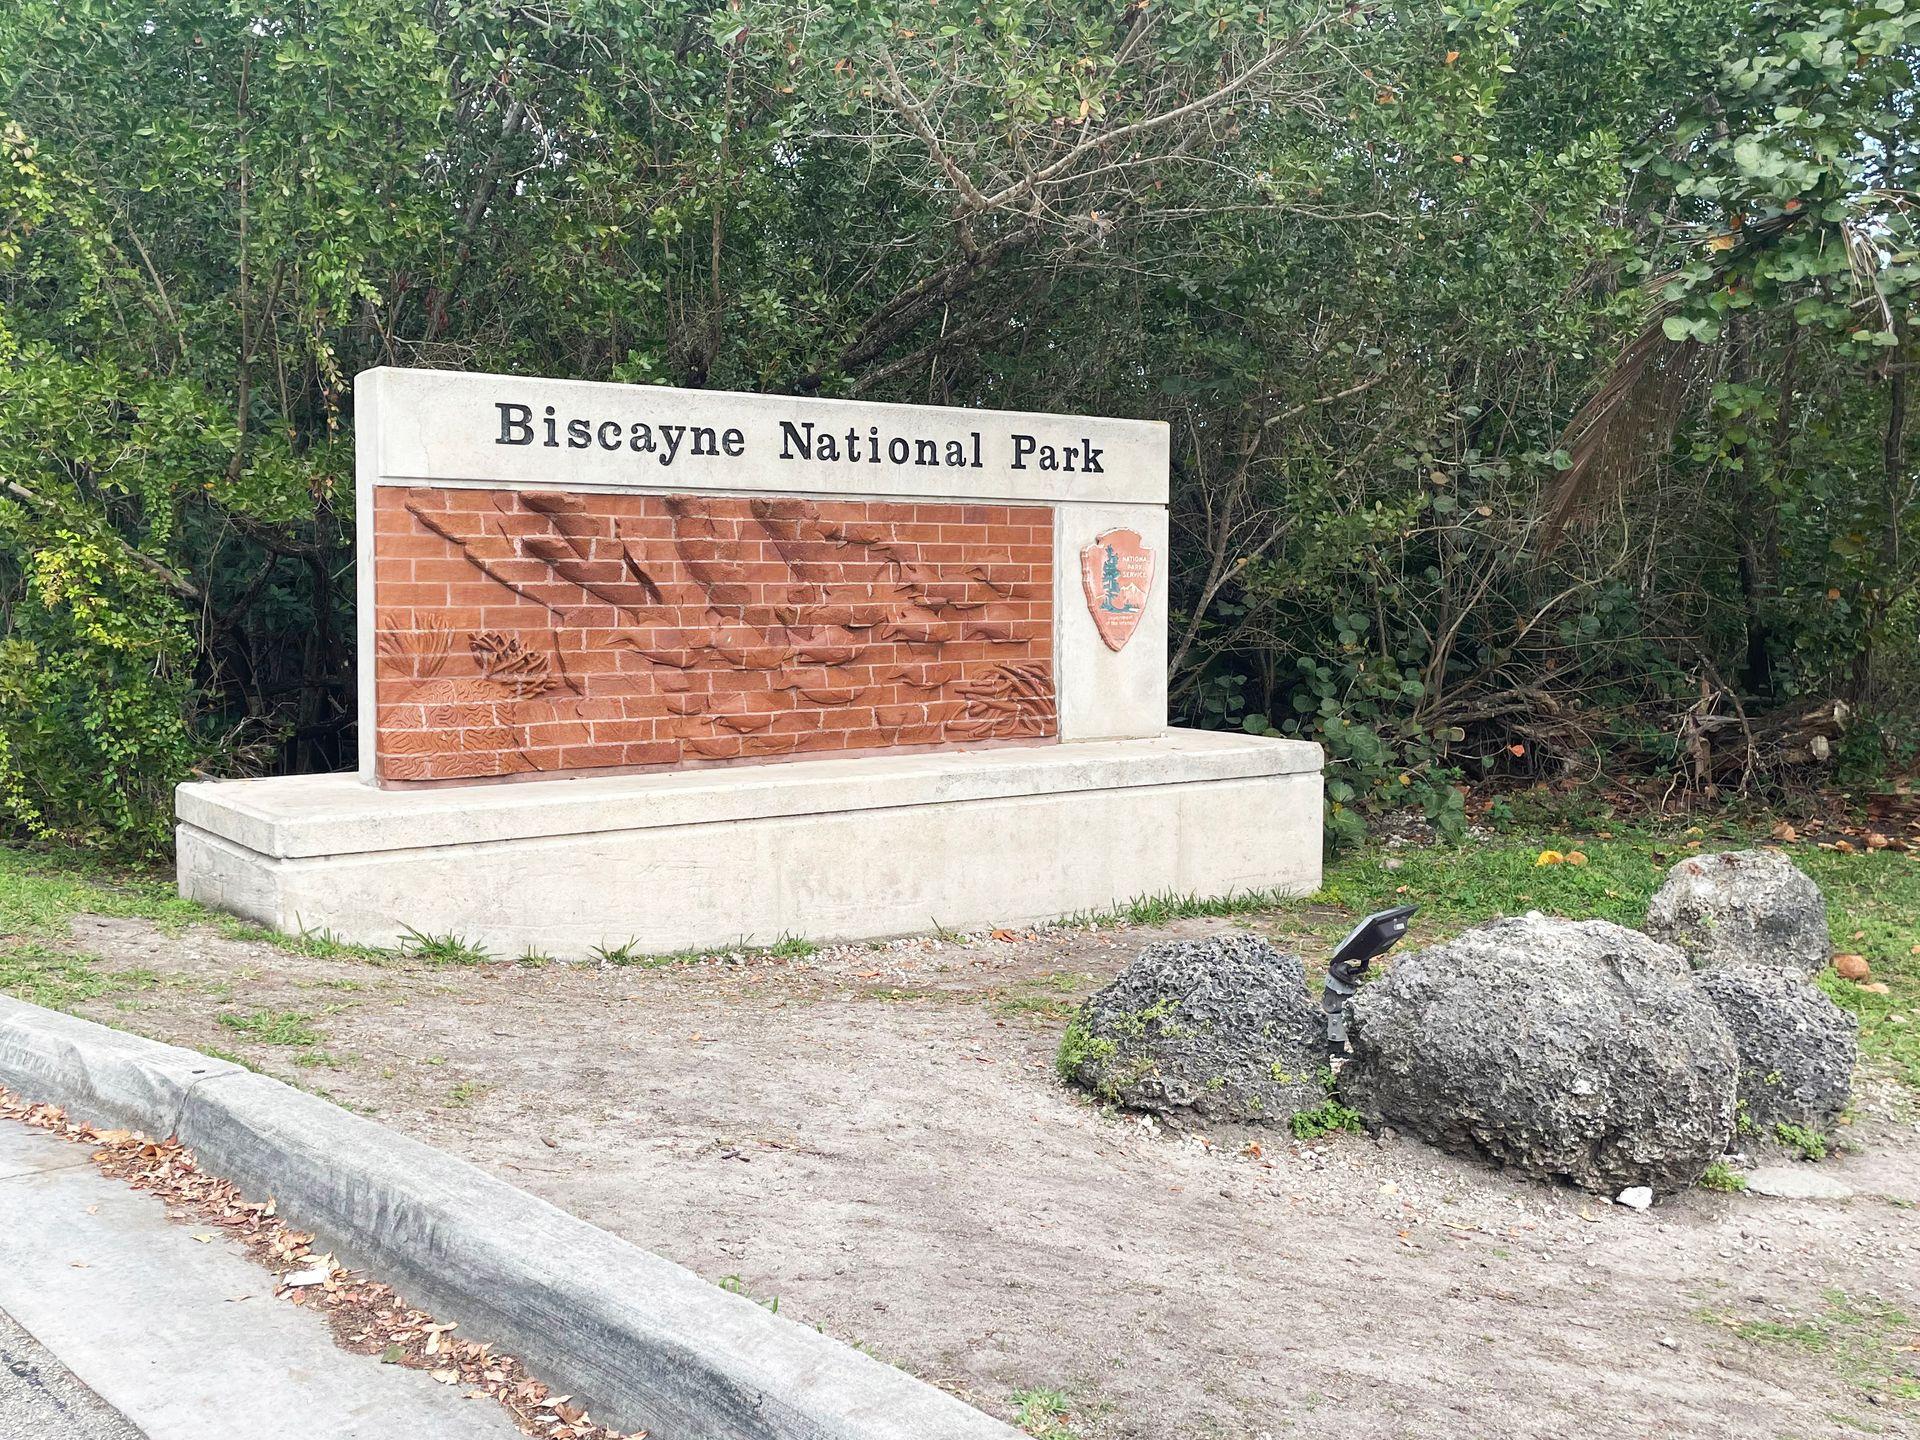 A large Biscayne National Park sign at the entrance of the park. The sign includes a scene of fish made of bricks